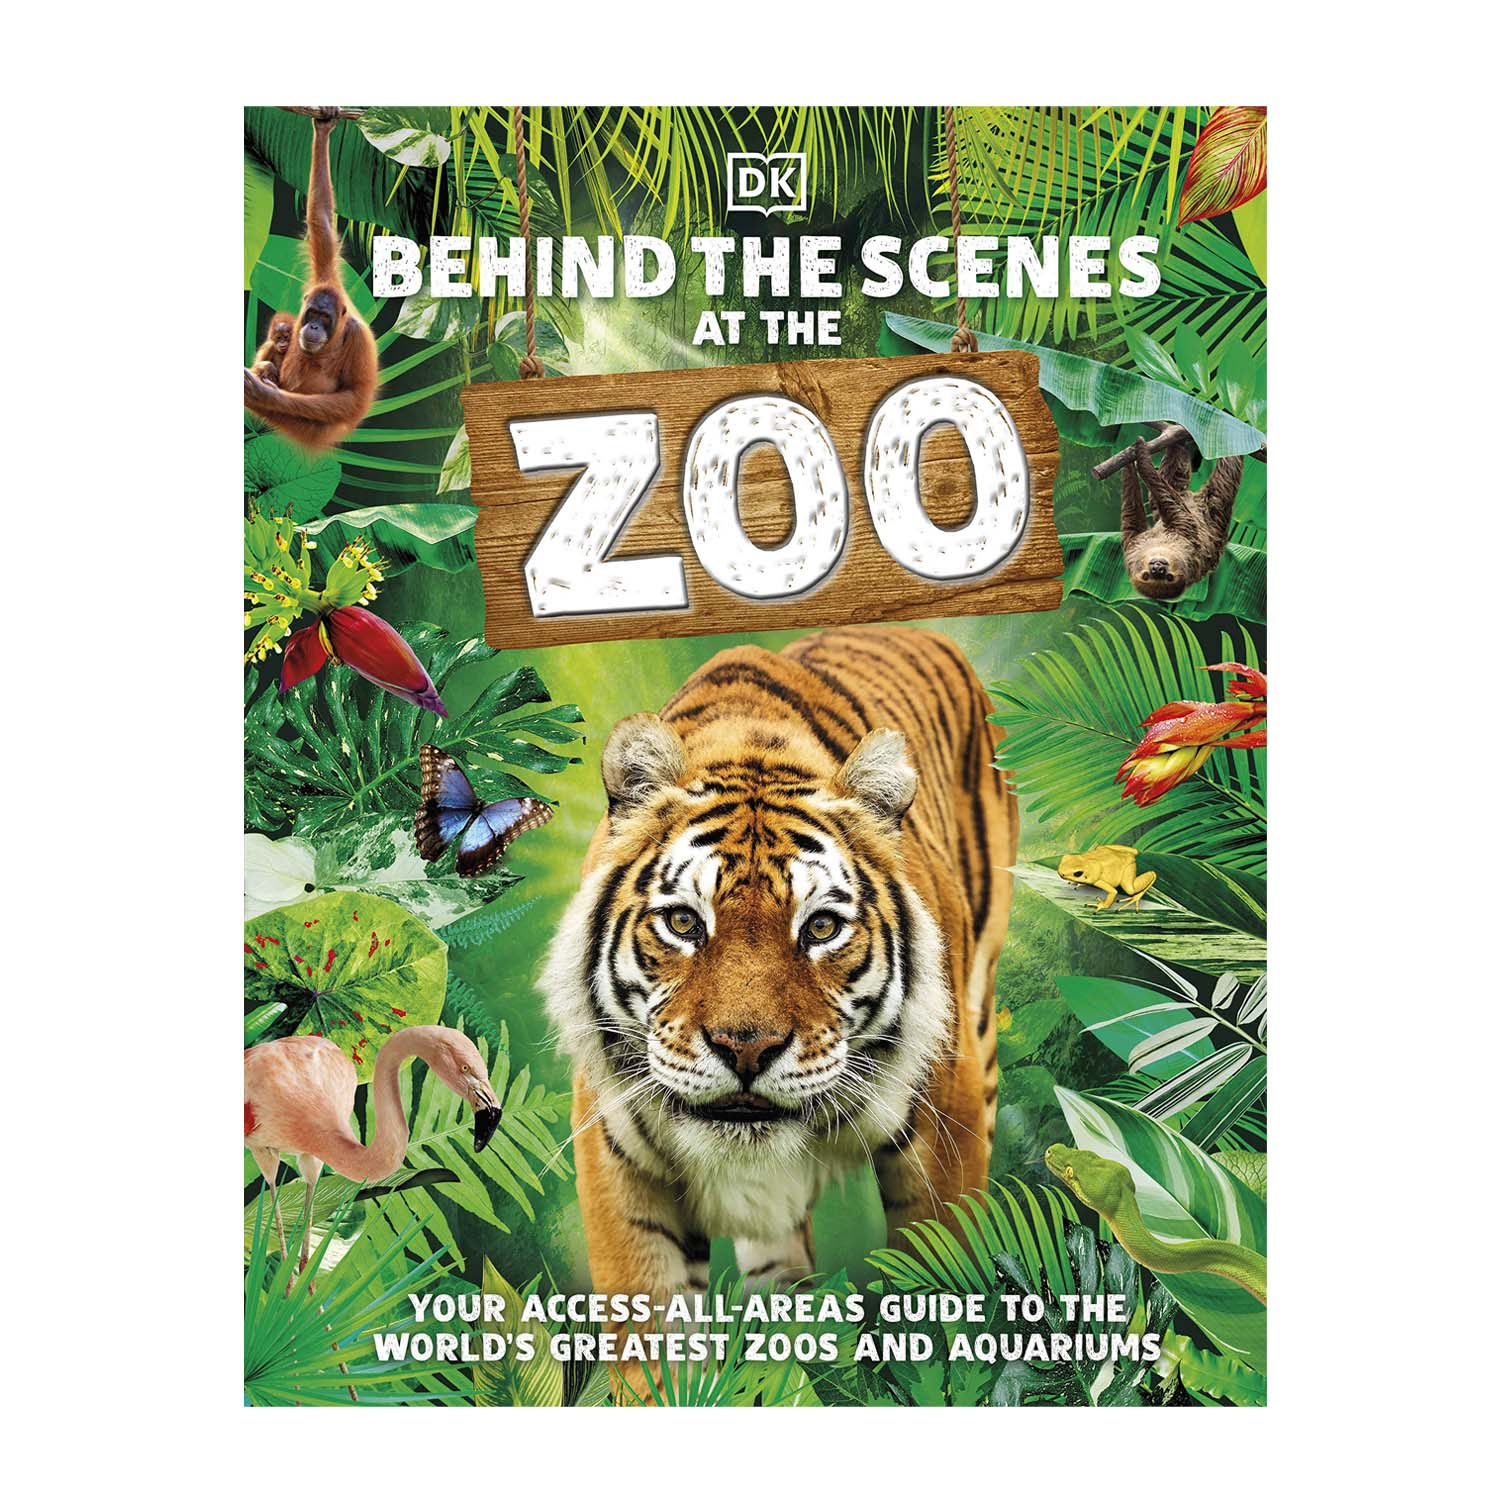 Behind the scenes the zoo book